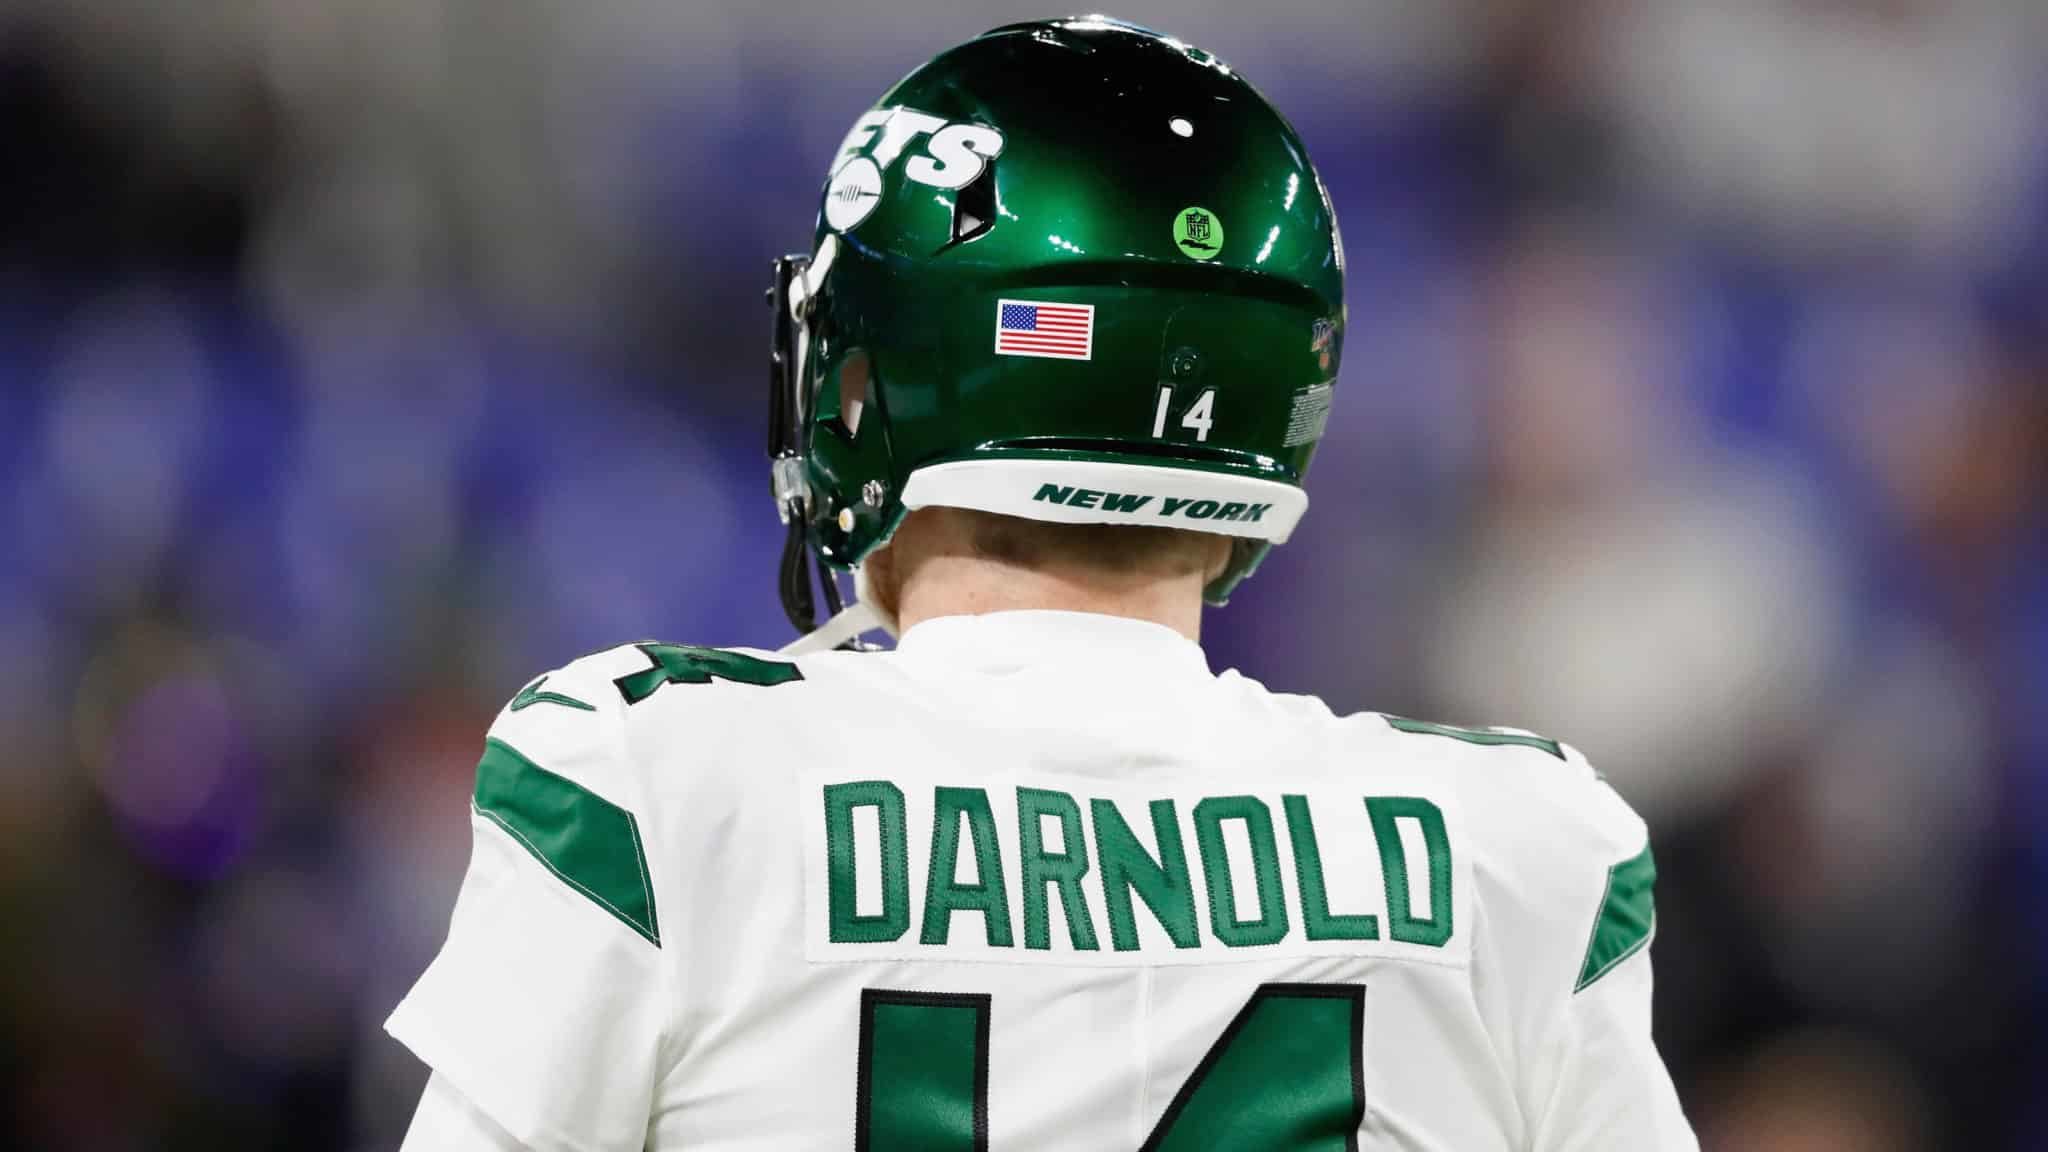 BALTIMORE, MARYLAND - DECEMBER 12: Quarterback Sam Darnold #14 of the New York Jets prepares for the game against the Baltimore Ravens at M&T Bank Stadium on December 12, 2019 in Baltimore, Maryland.